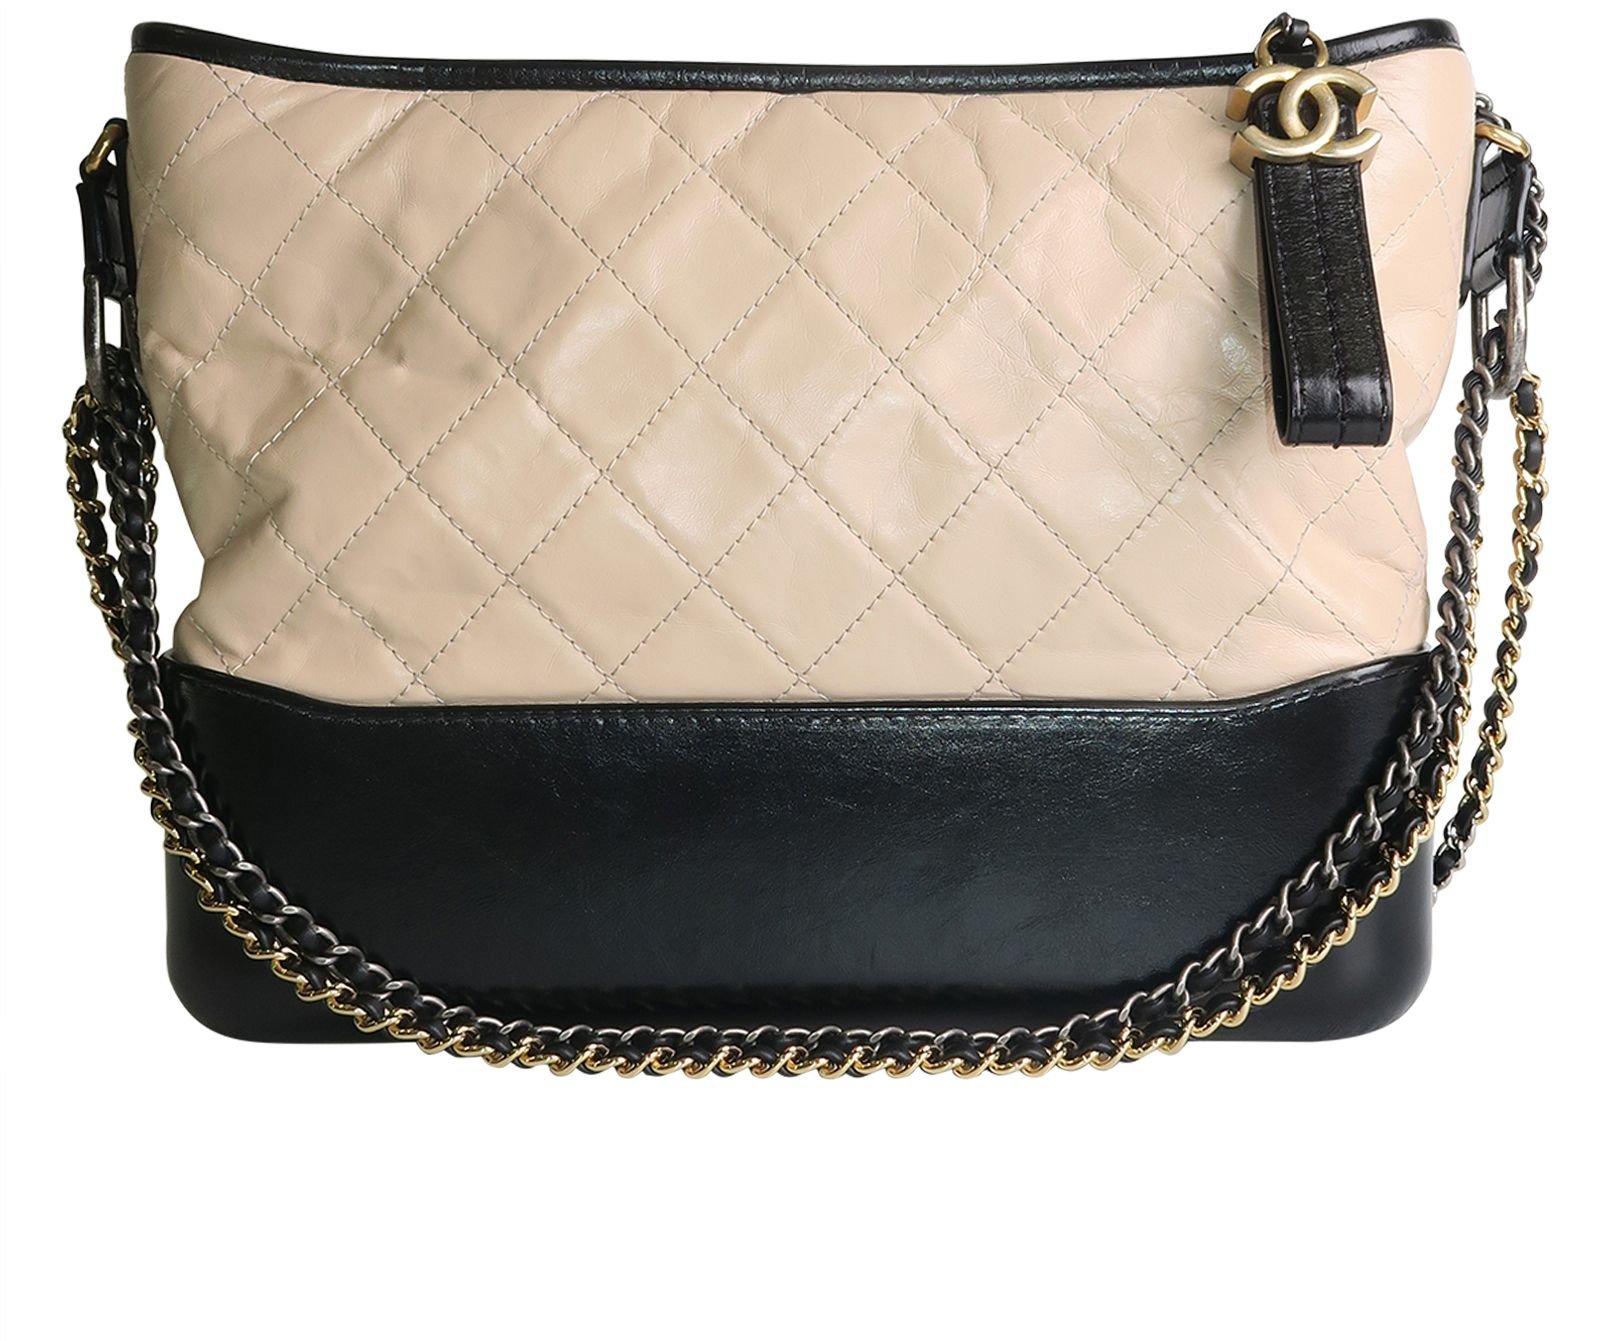 Chanel Gabrielle Bag - See Every New Chanel Gabrielle Bag